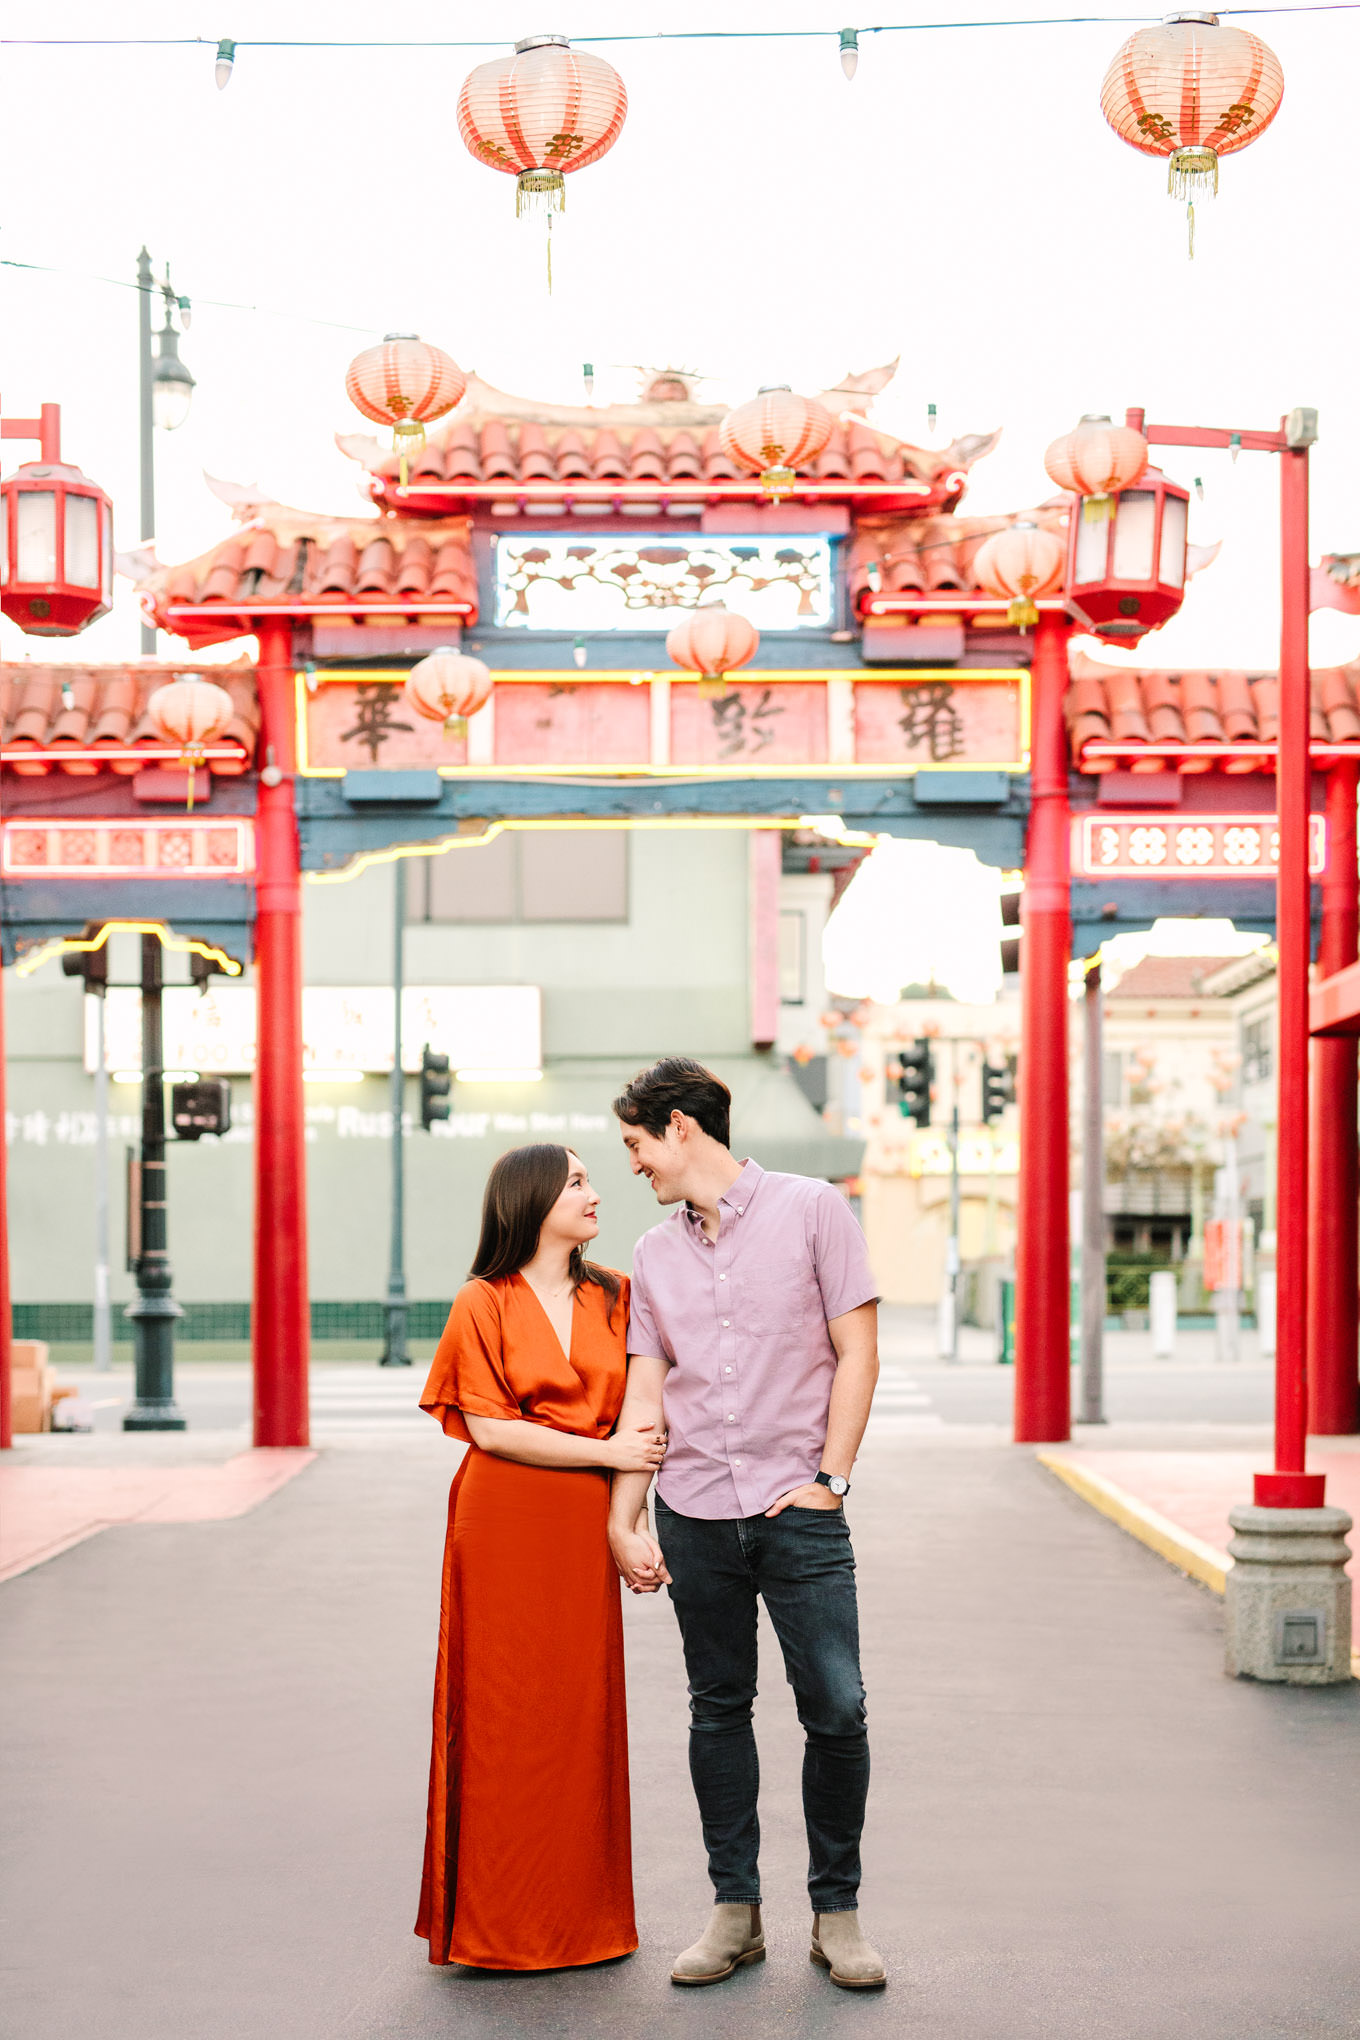 Los Angeles Chinatown engagement session | Engagement, elopement, and wedding photography roundup of Mary Costa’s favorite images from 2020 | Colorful and elevated photography for fun-loving couples in Southern California | #2020wedding #elopement #weddingphoto #weddingphotography #microwedding   Source: Mary Costa Photography | Los Angeles